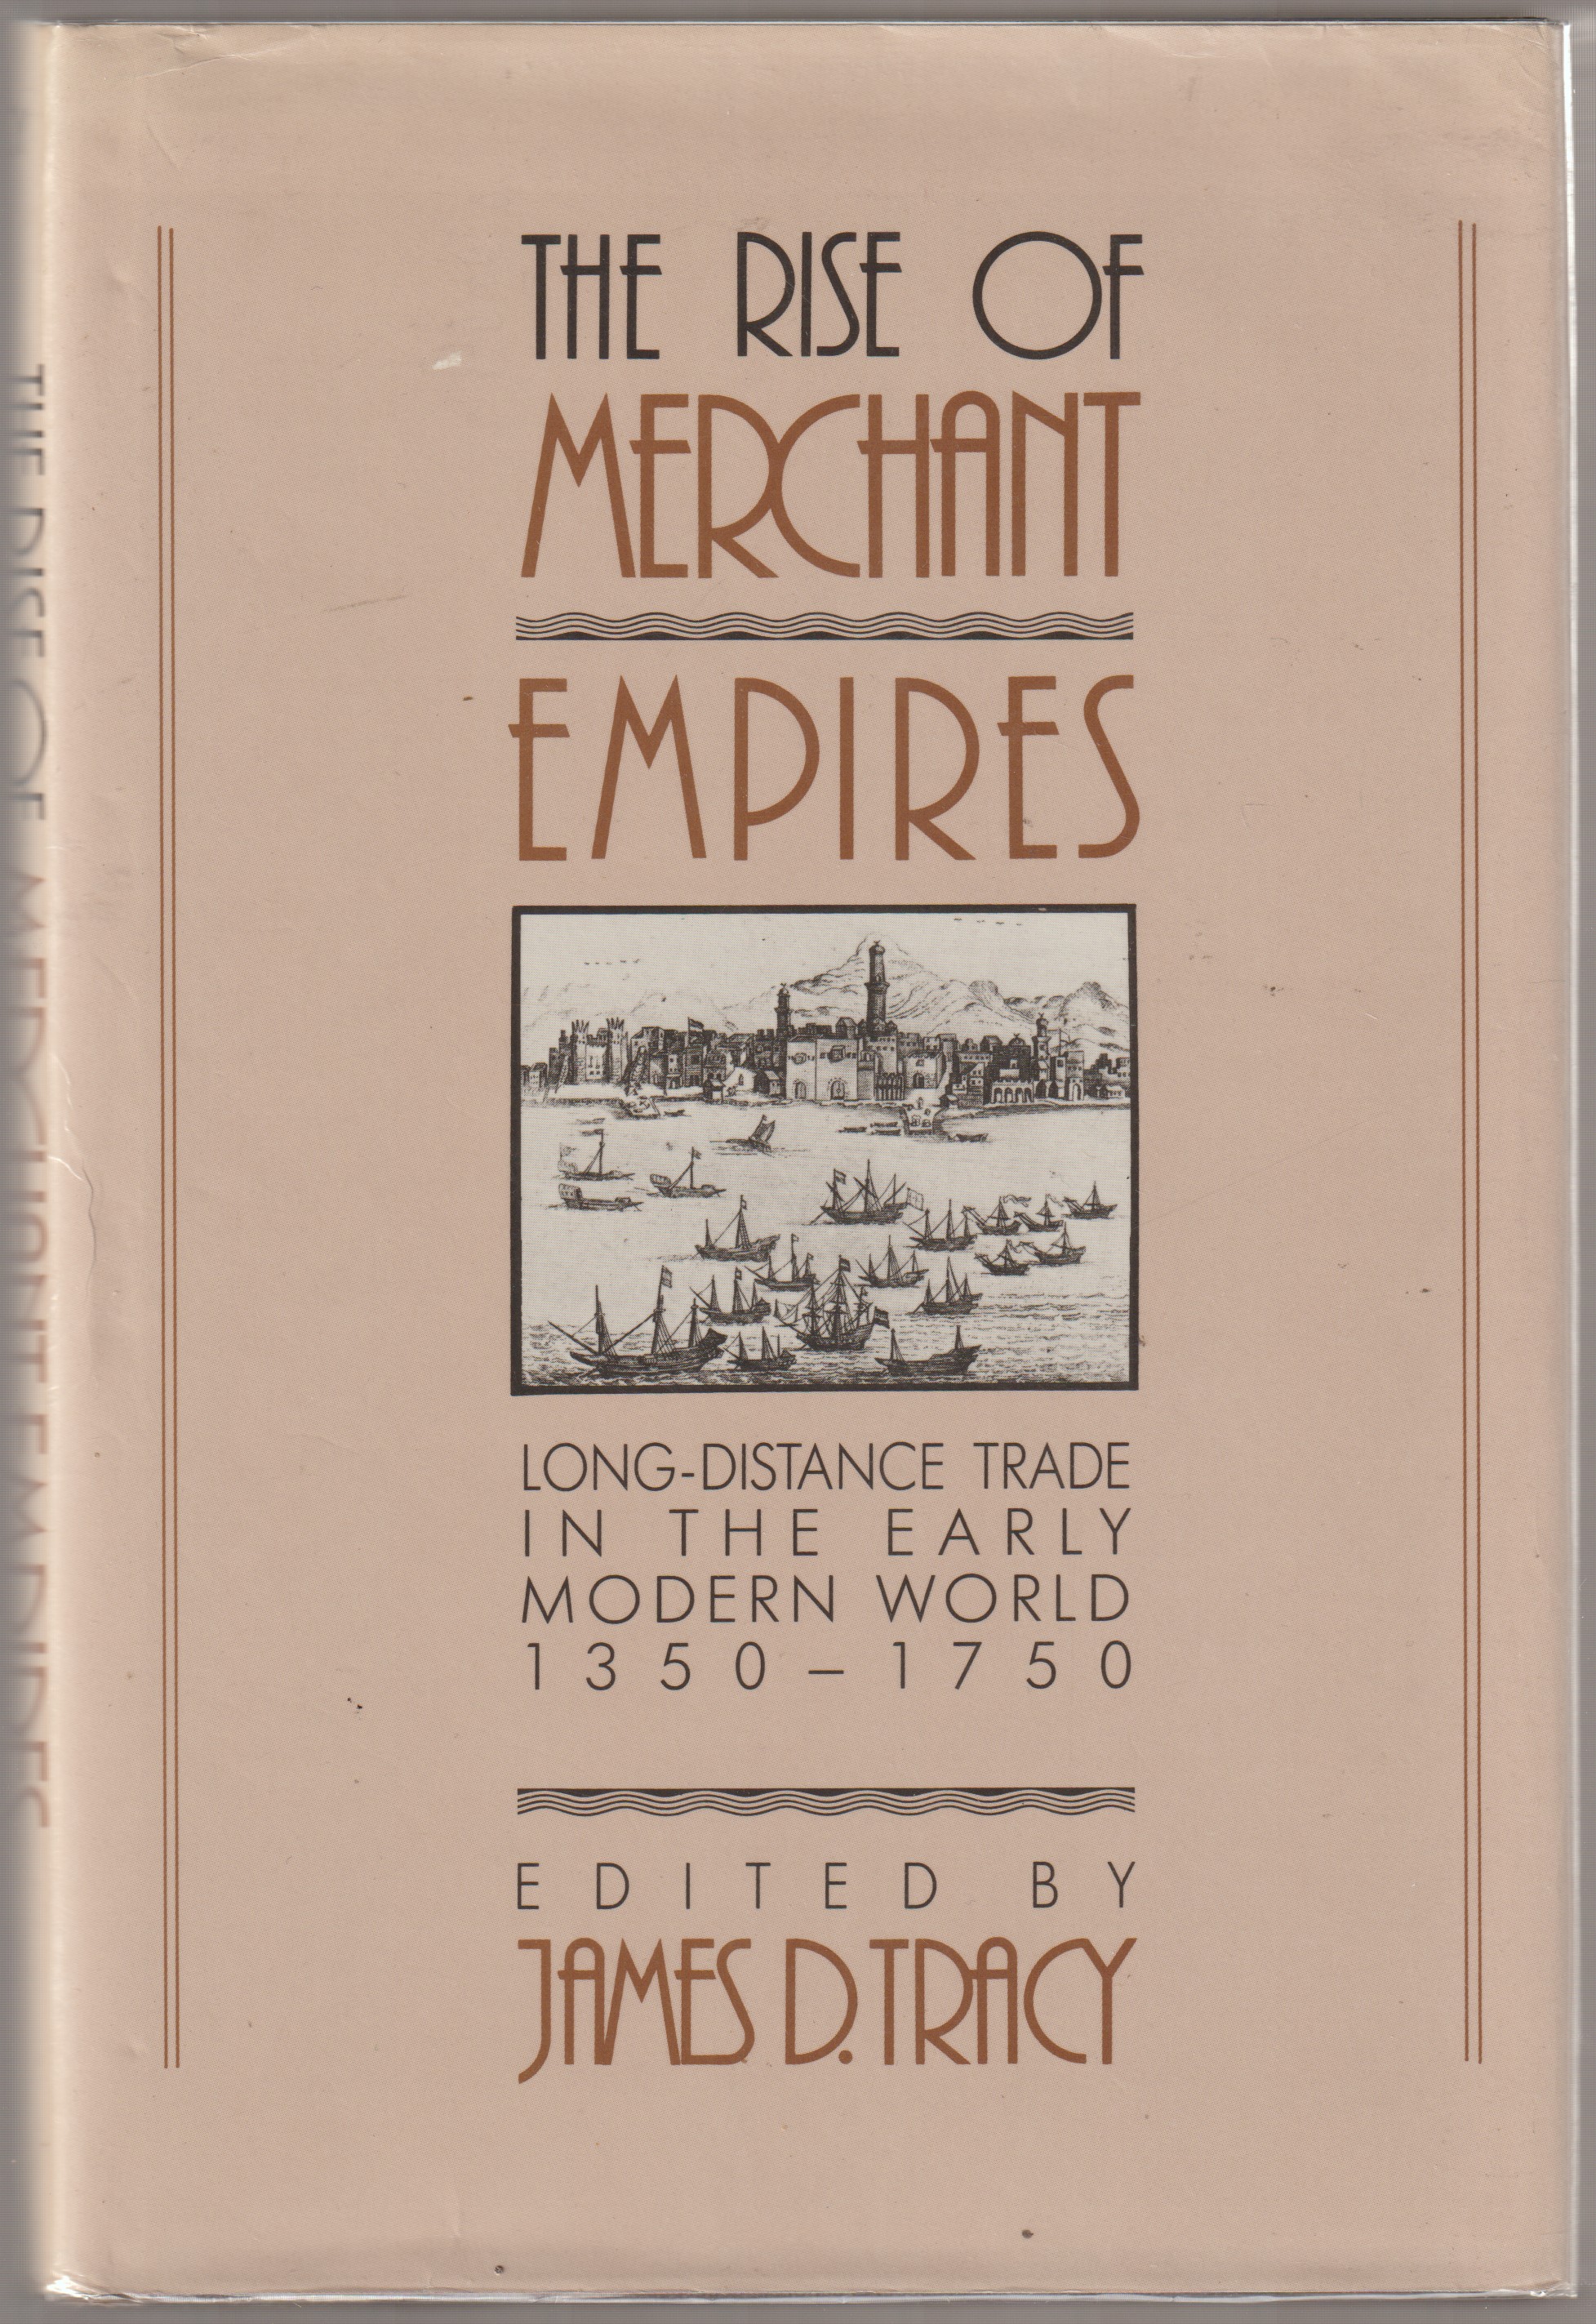 The rise of merchant empires : long-distance trade in the early modern world, 1350-1750